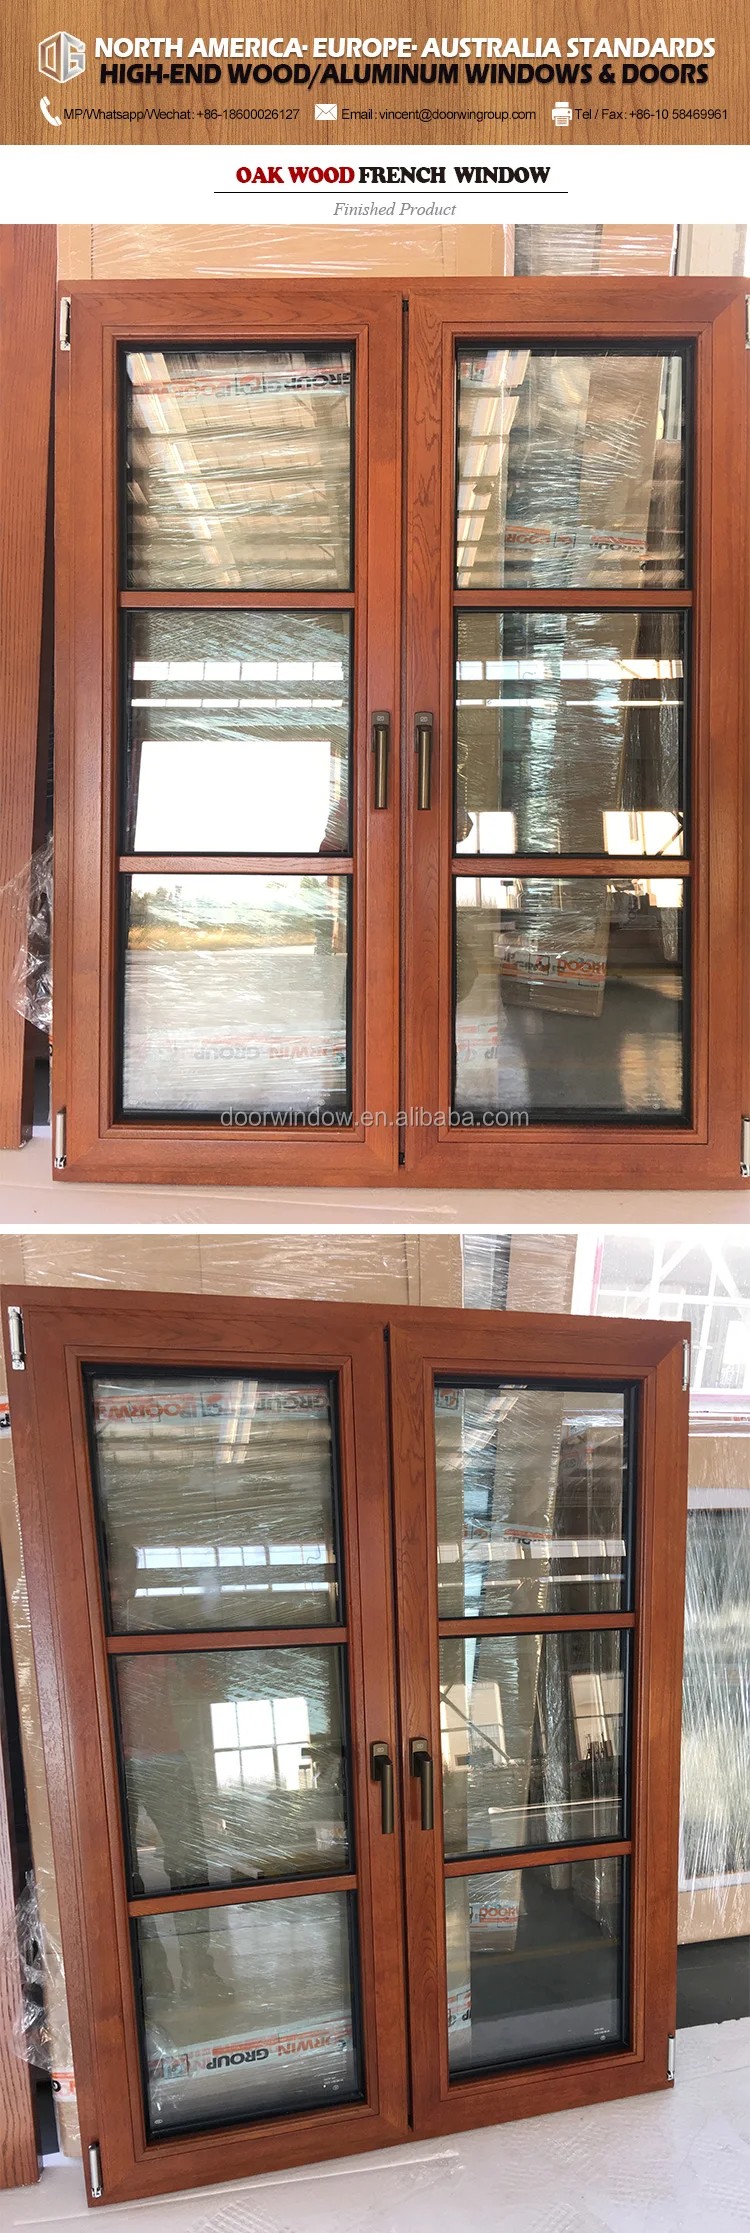 China Manufactory house with wooden windows home wood window design hardwood prices online